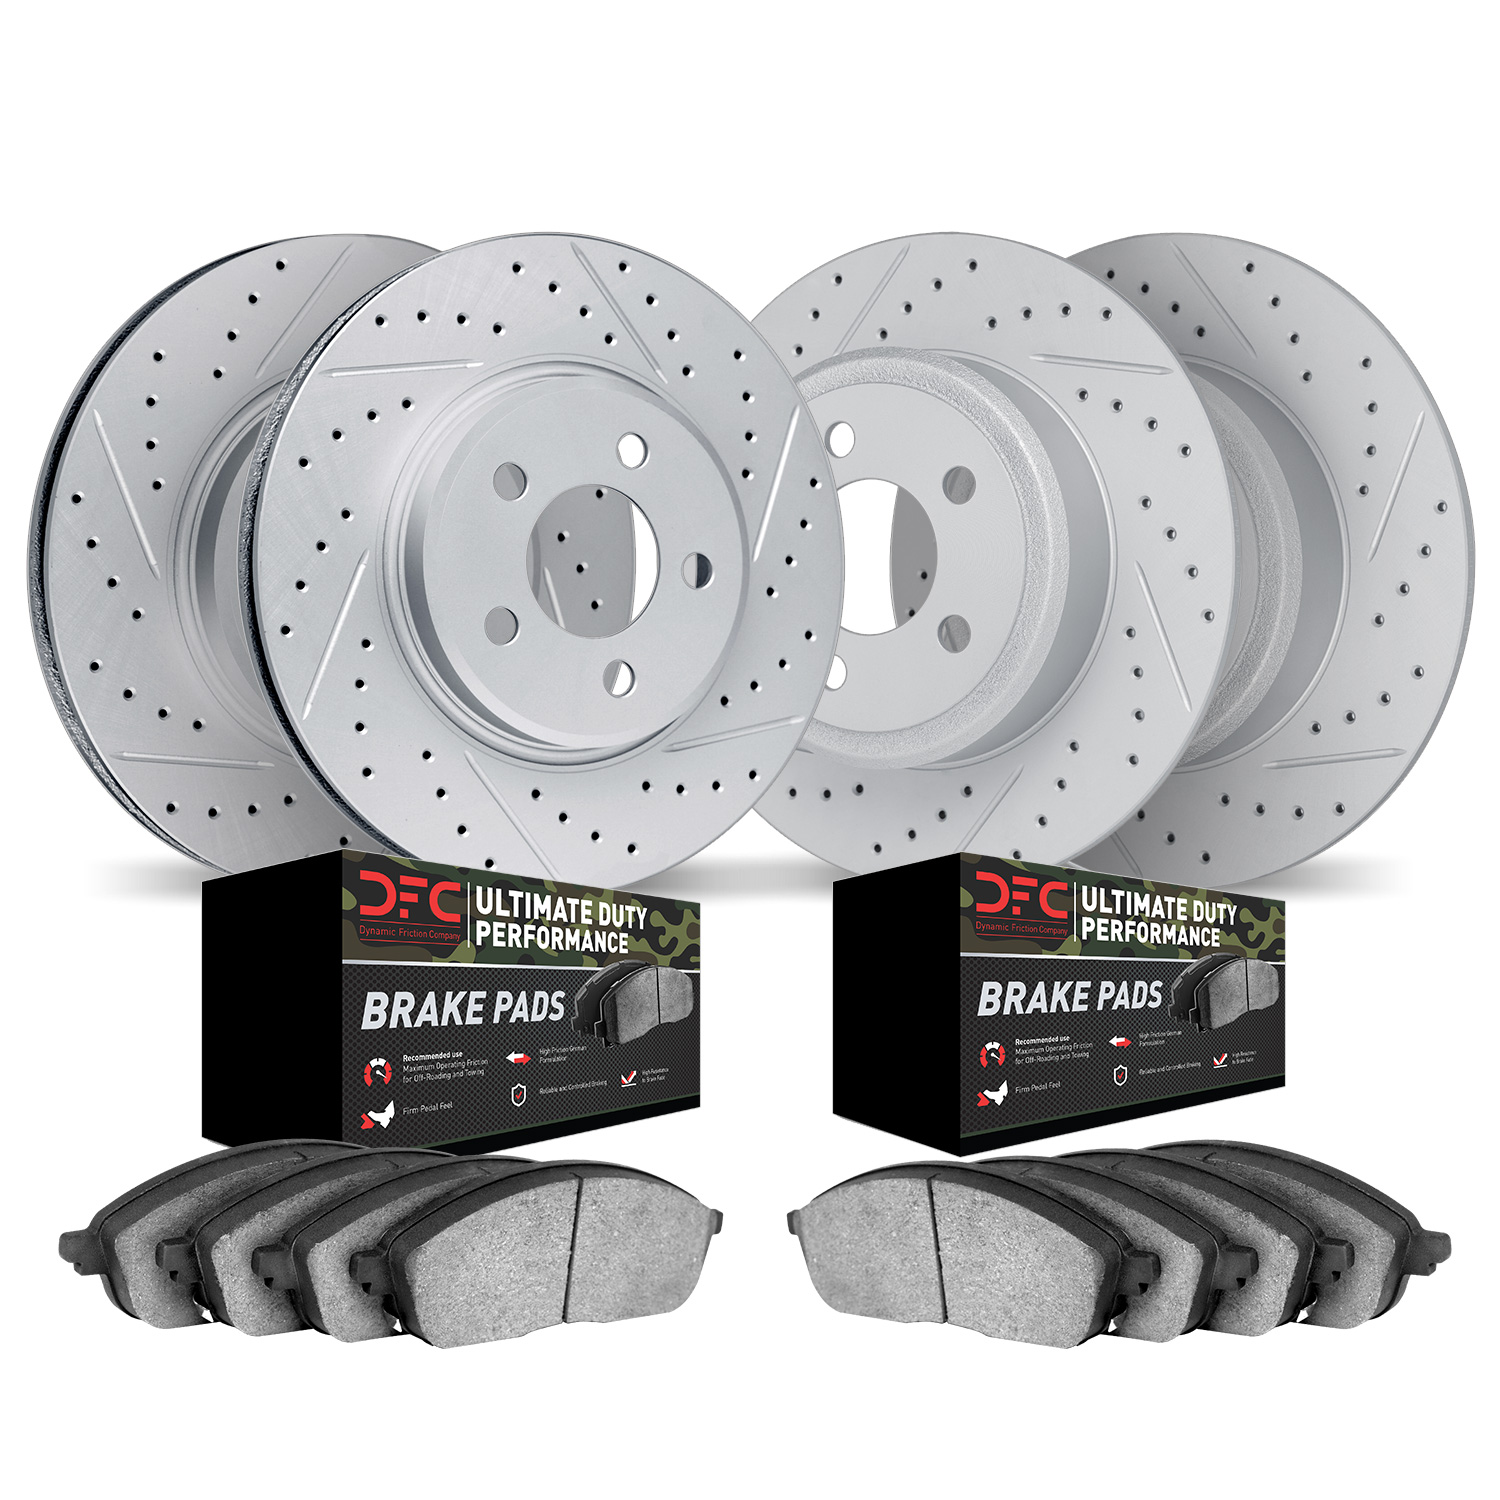 2404-54004 Geoperformance Drilled/Slotted Brake Rotors with Ultimate-Duty Brake Pads Kit, 1998-1999 Ford/Lincoln/Mercury/Mazda,